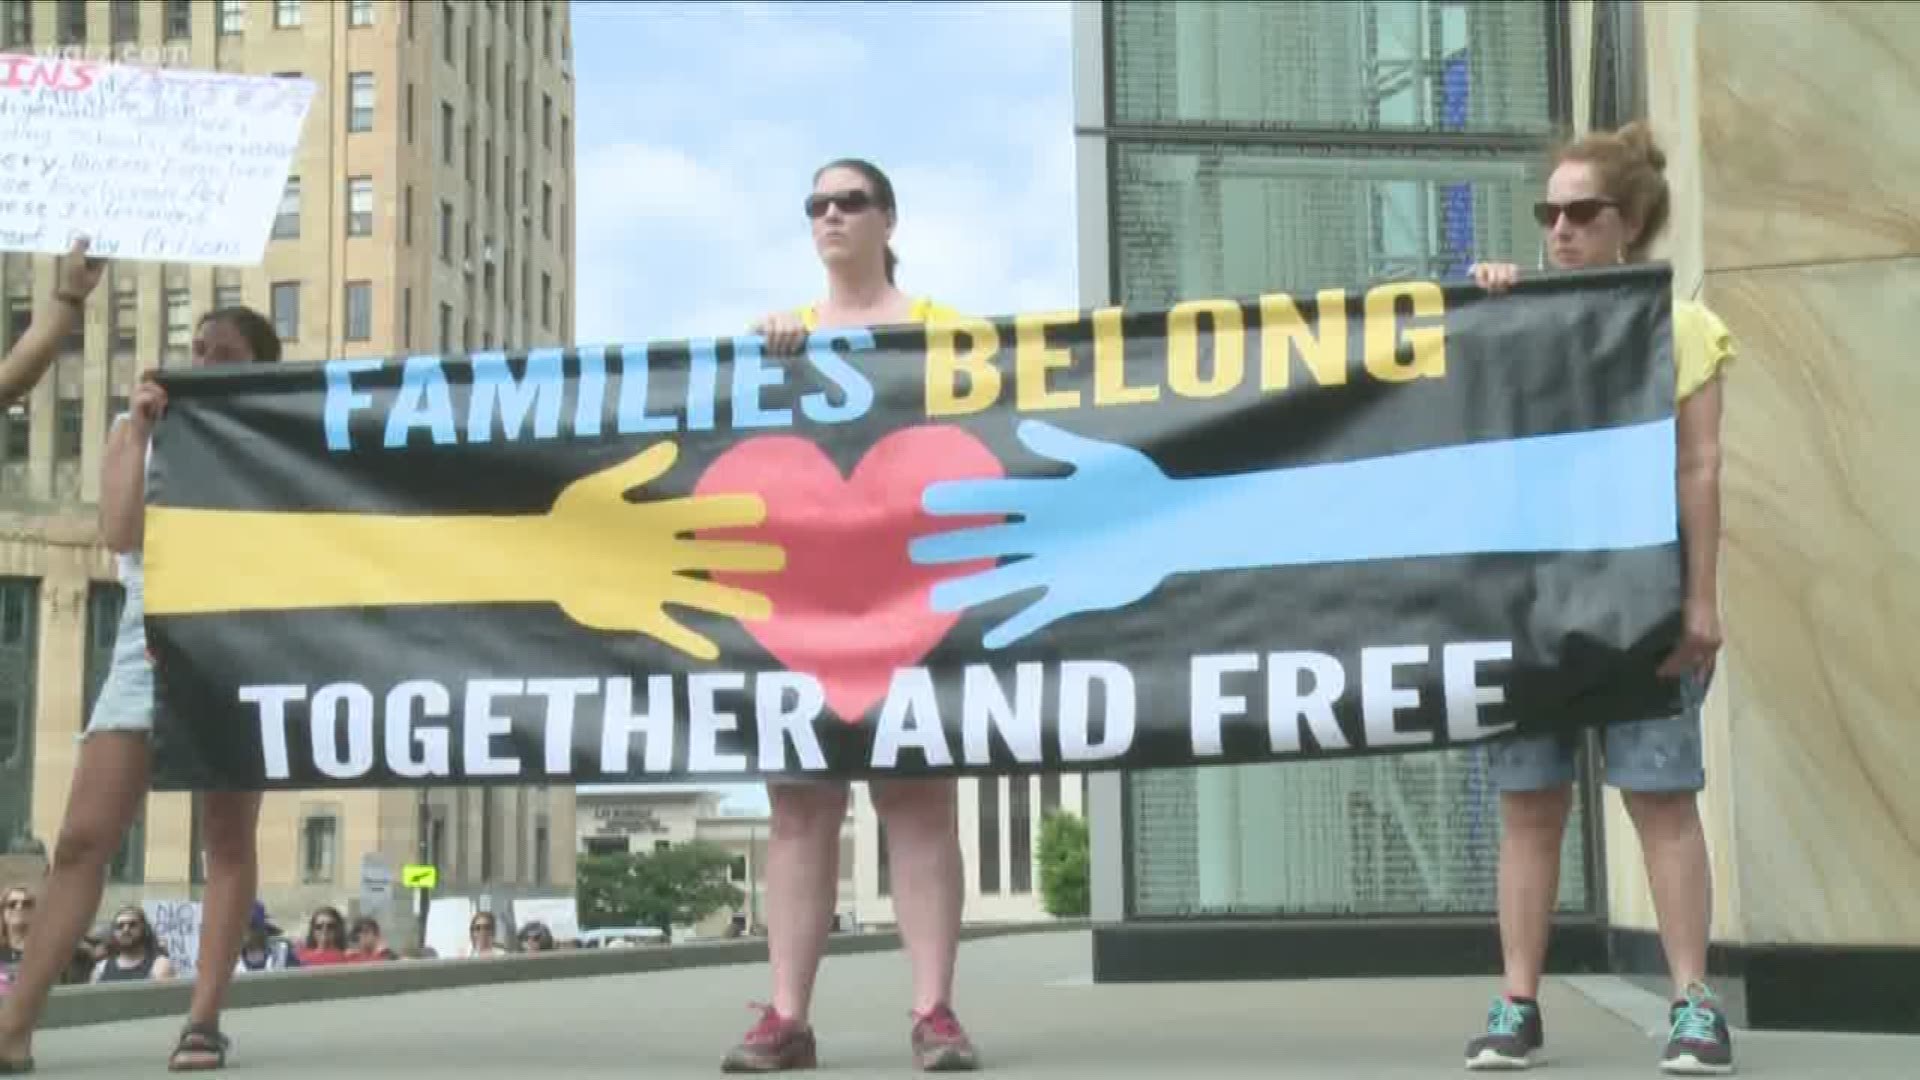 "Families Together" rallies protest immigration policies